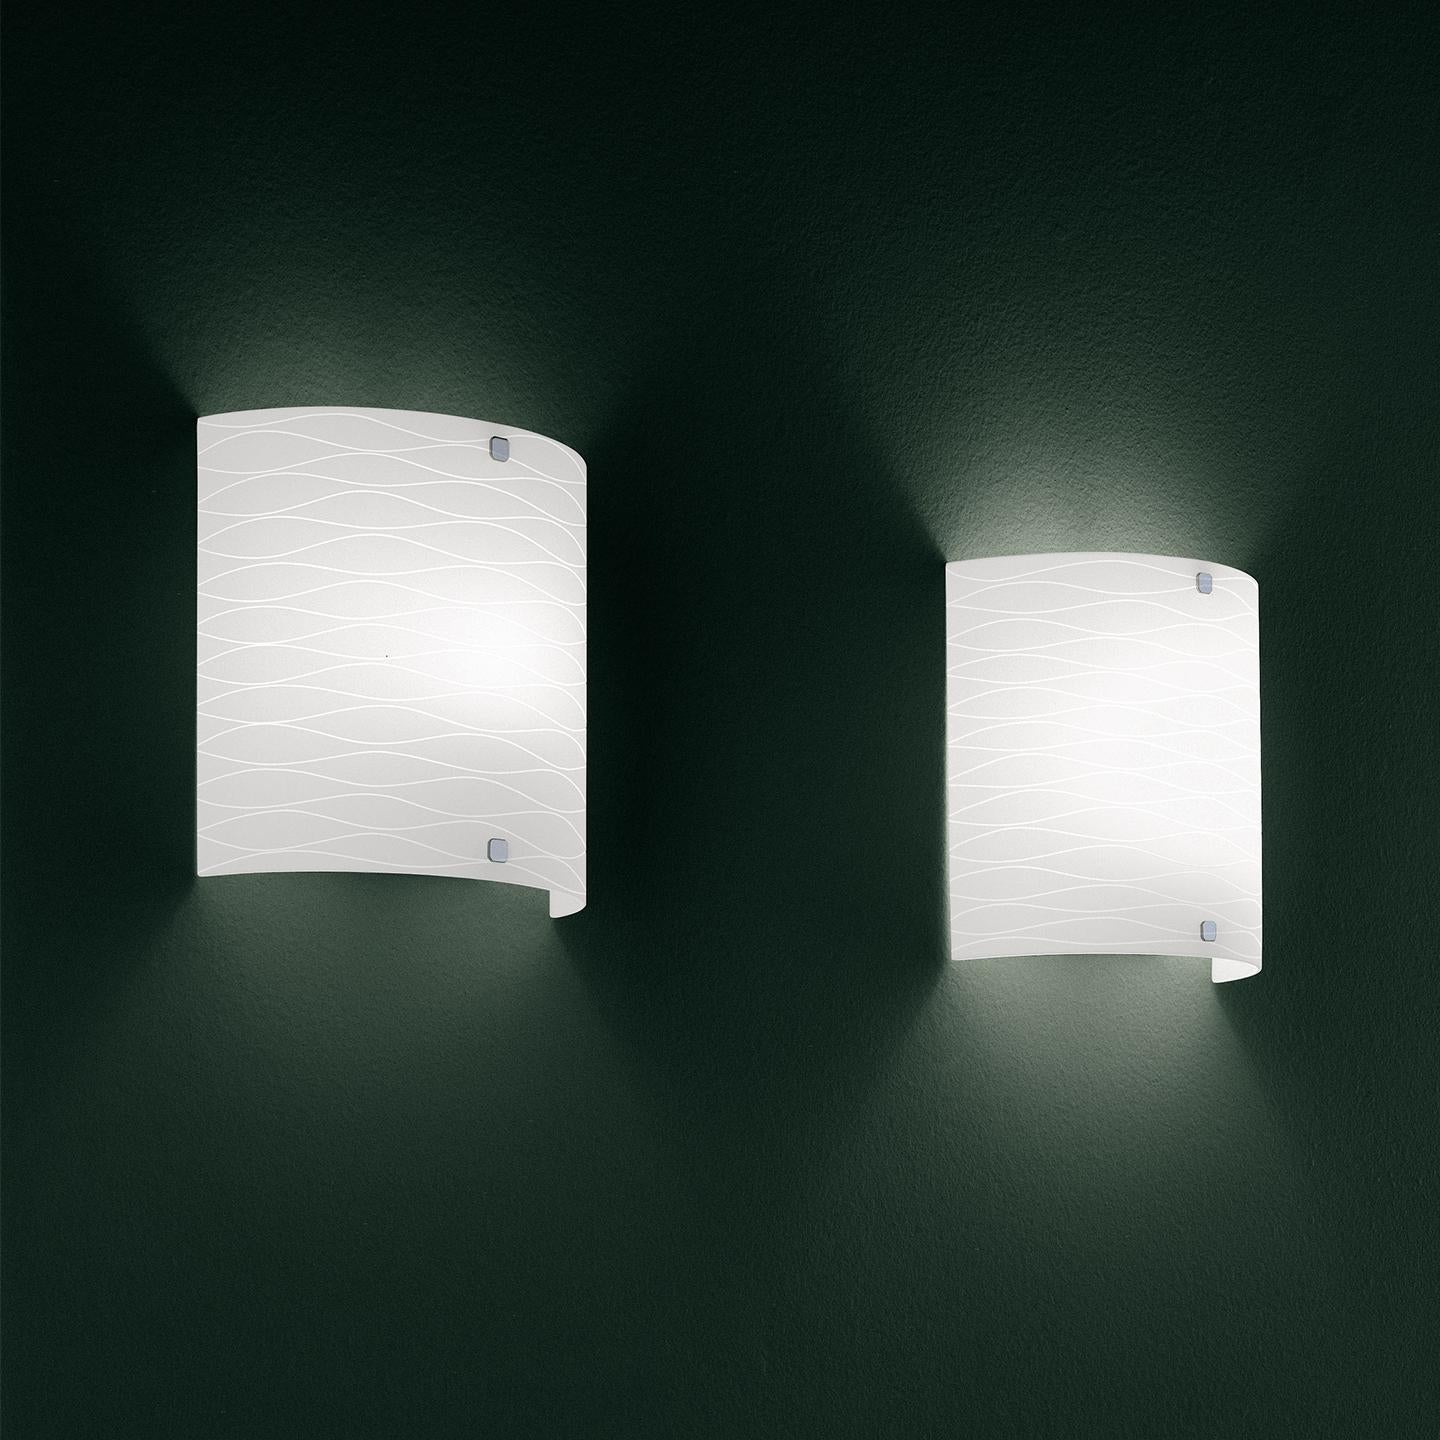 The class wall lamp was designed by Leucos design lab to be a fun, elegant lighting solution. The glass is hand-blown in Italy with a beautiful, wave-like horizontal etch detail. Compact overhang (ADA compliant). The class collection includes a